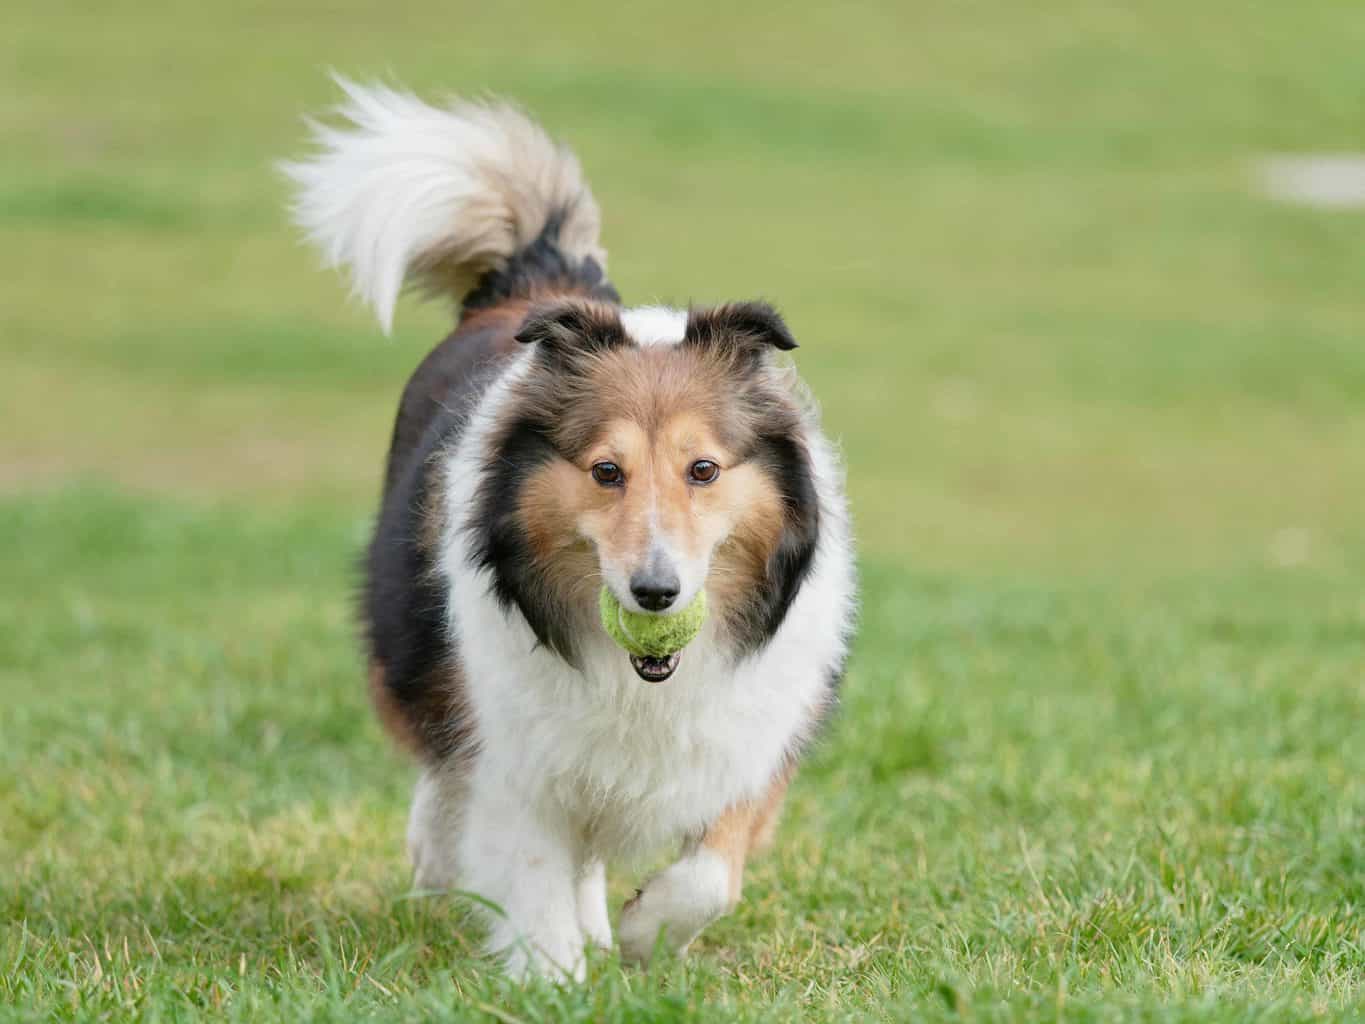 Collie plays with tennis ball in a backyard.